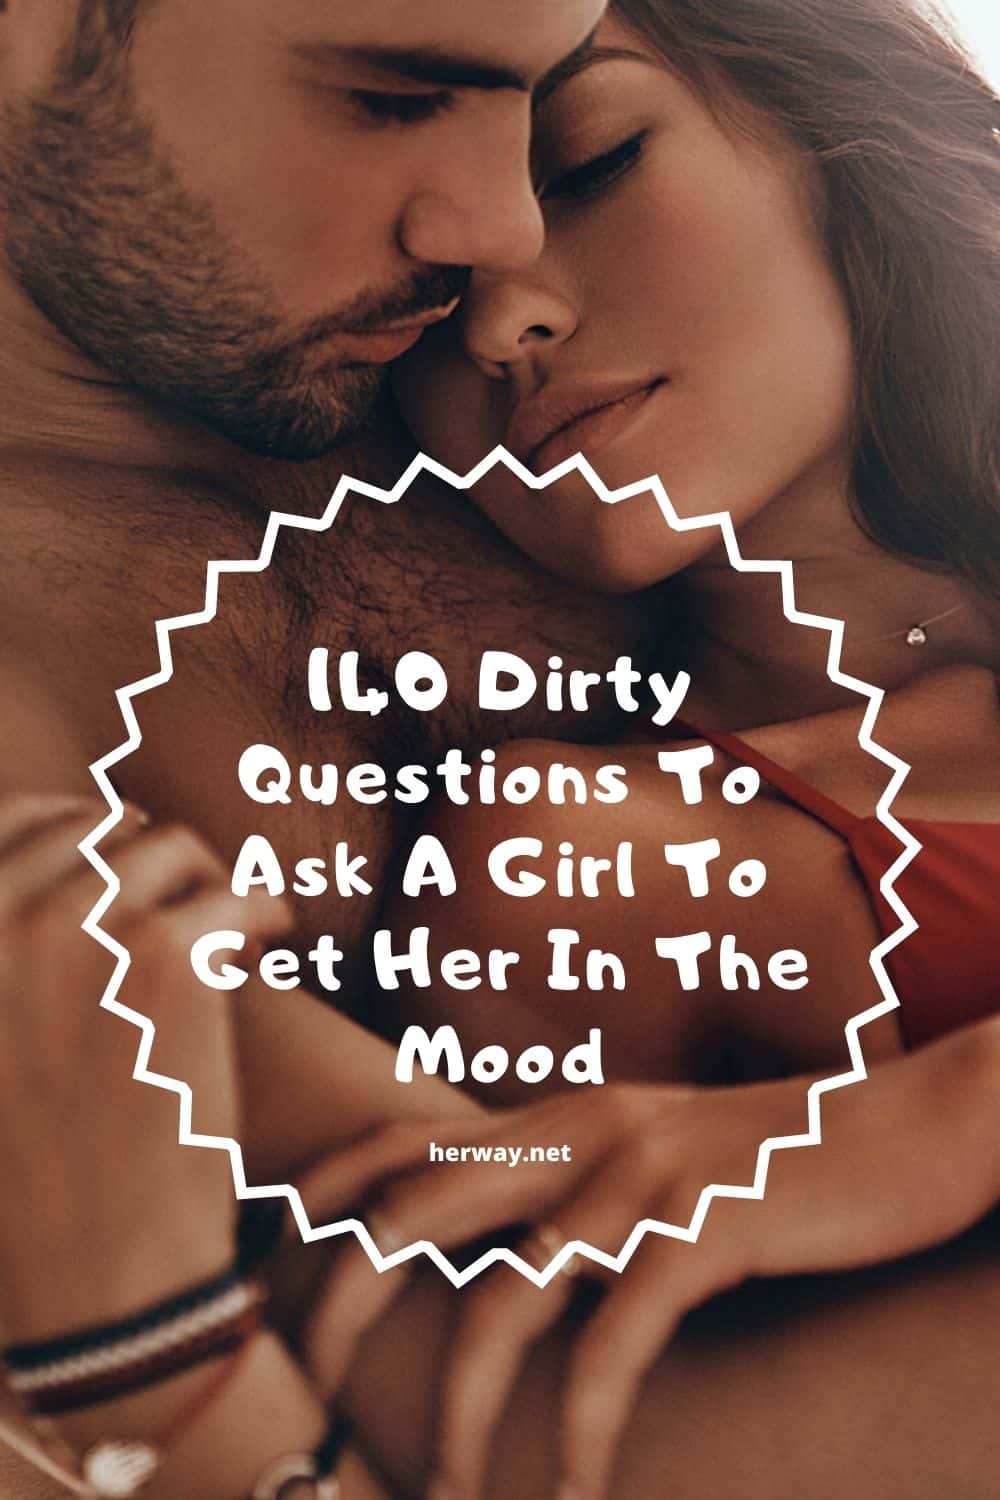 140 Dirty Questions To Ask A Girl To Get Her In The Mood